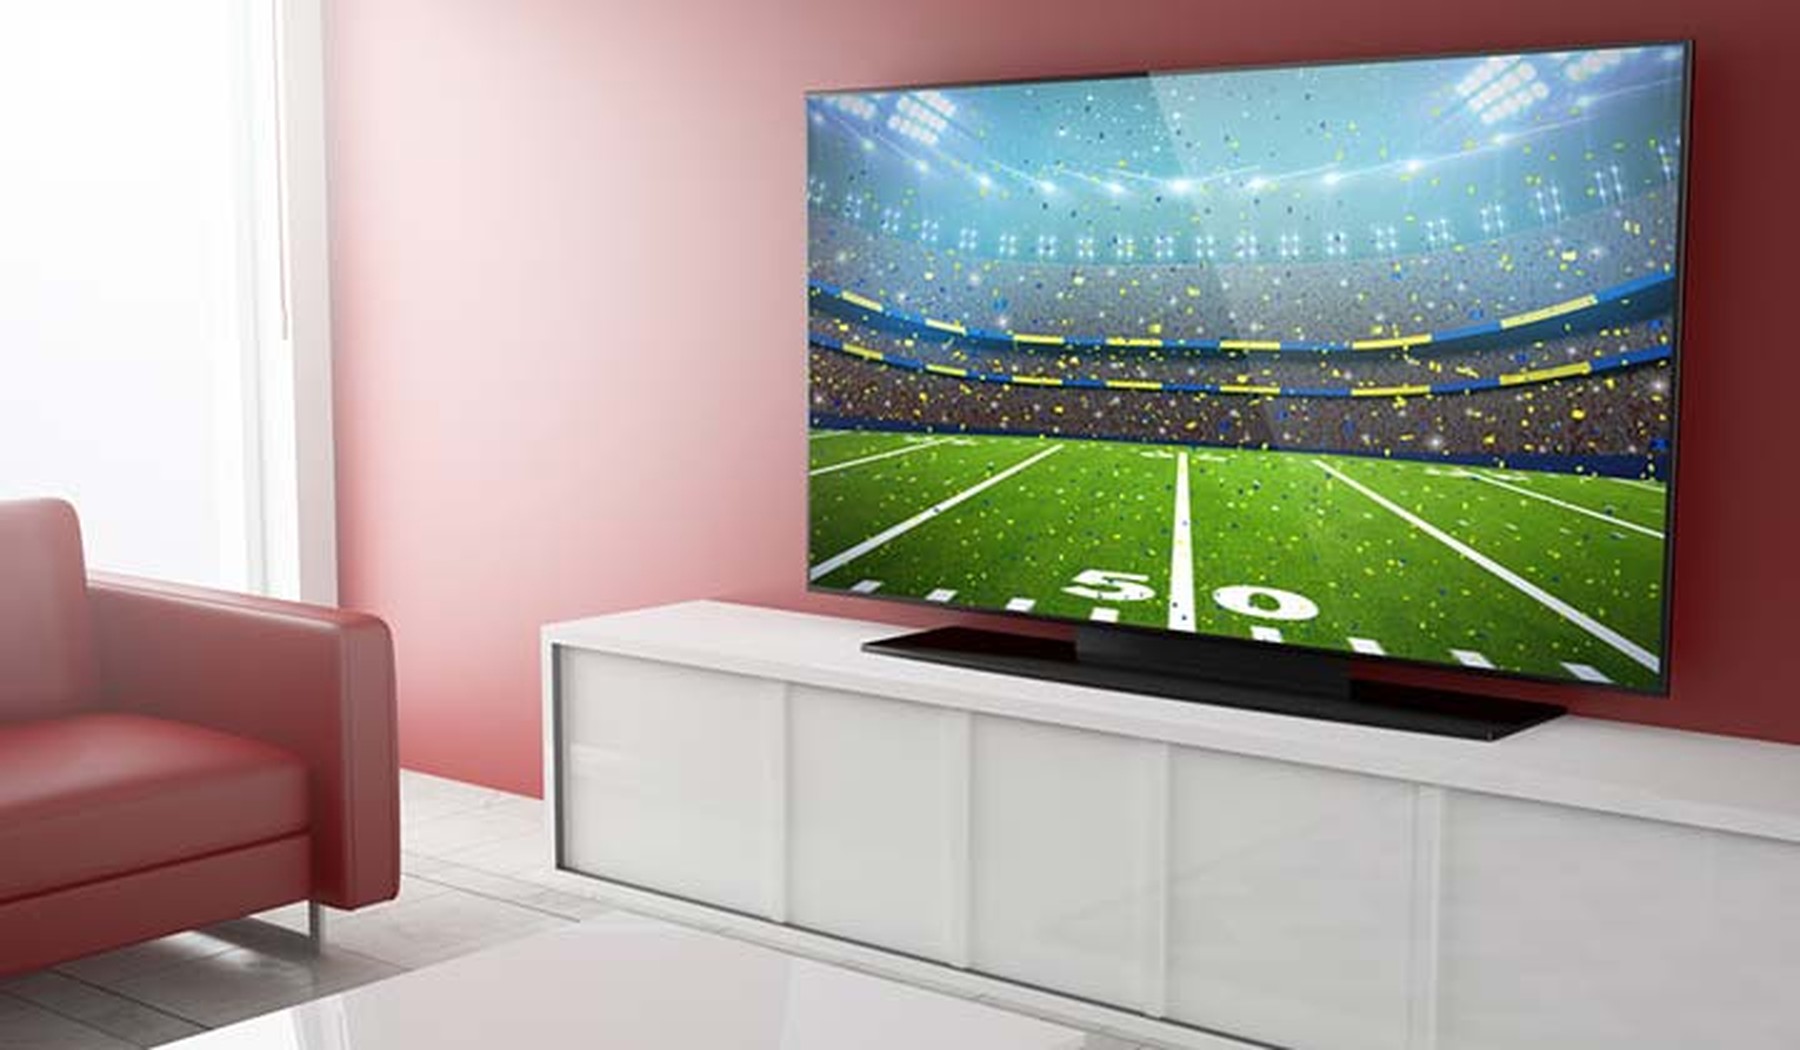 Large TV showing a football field